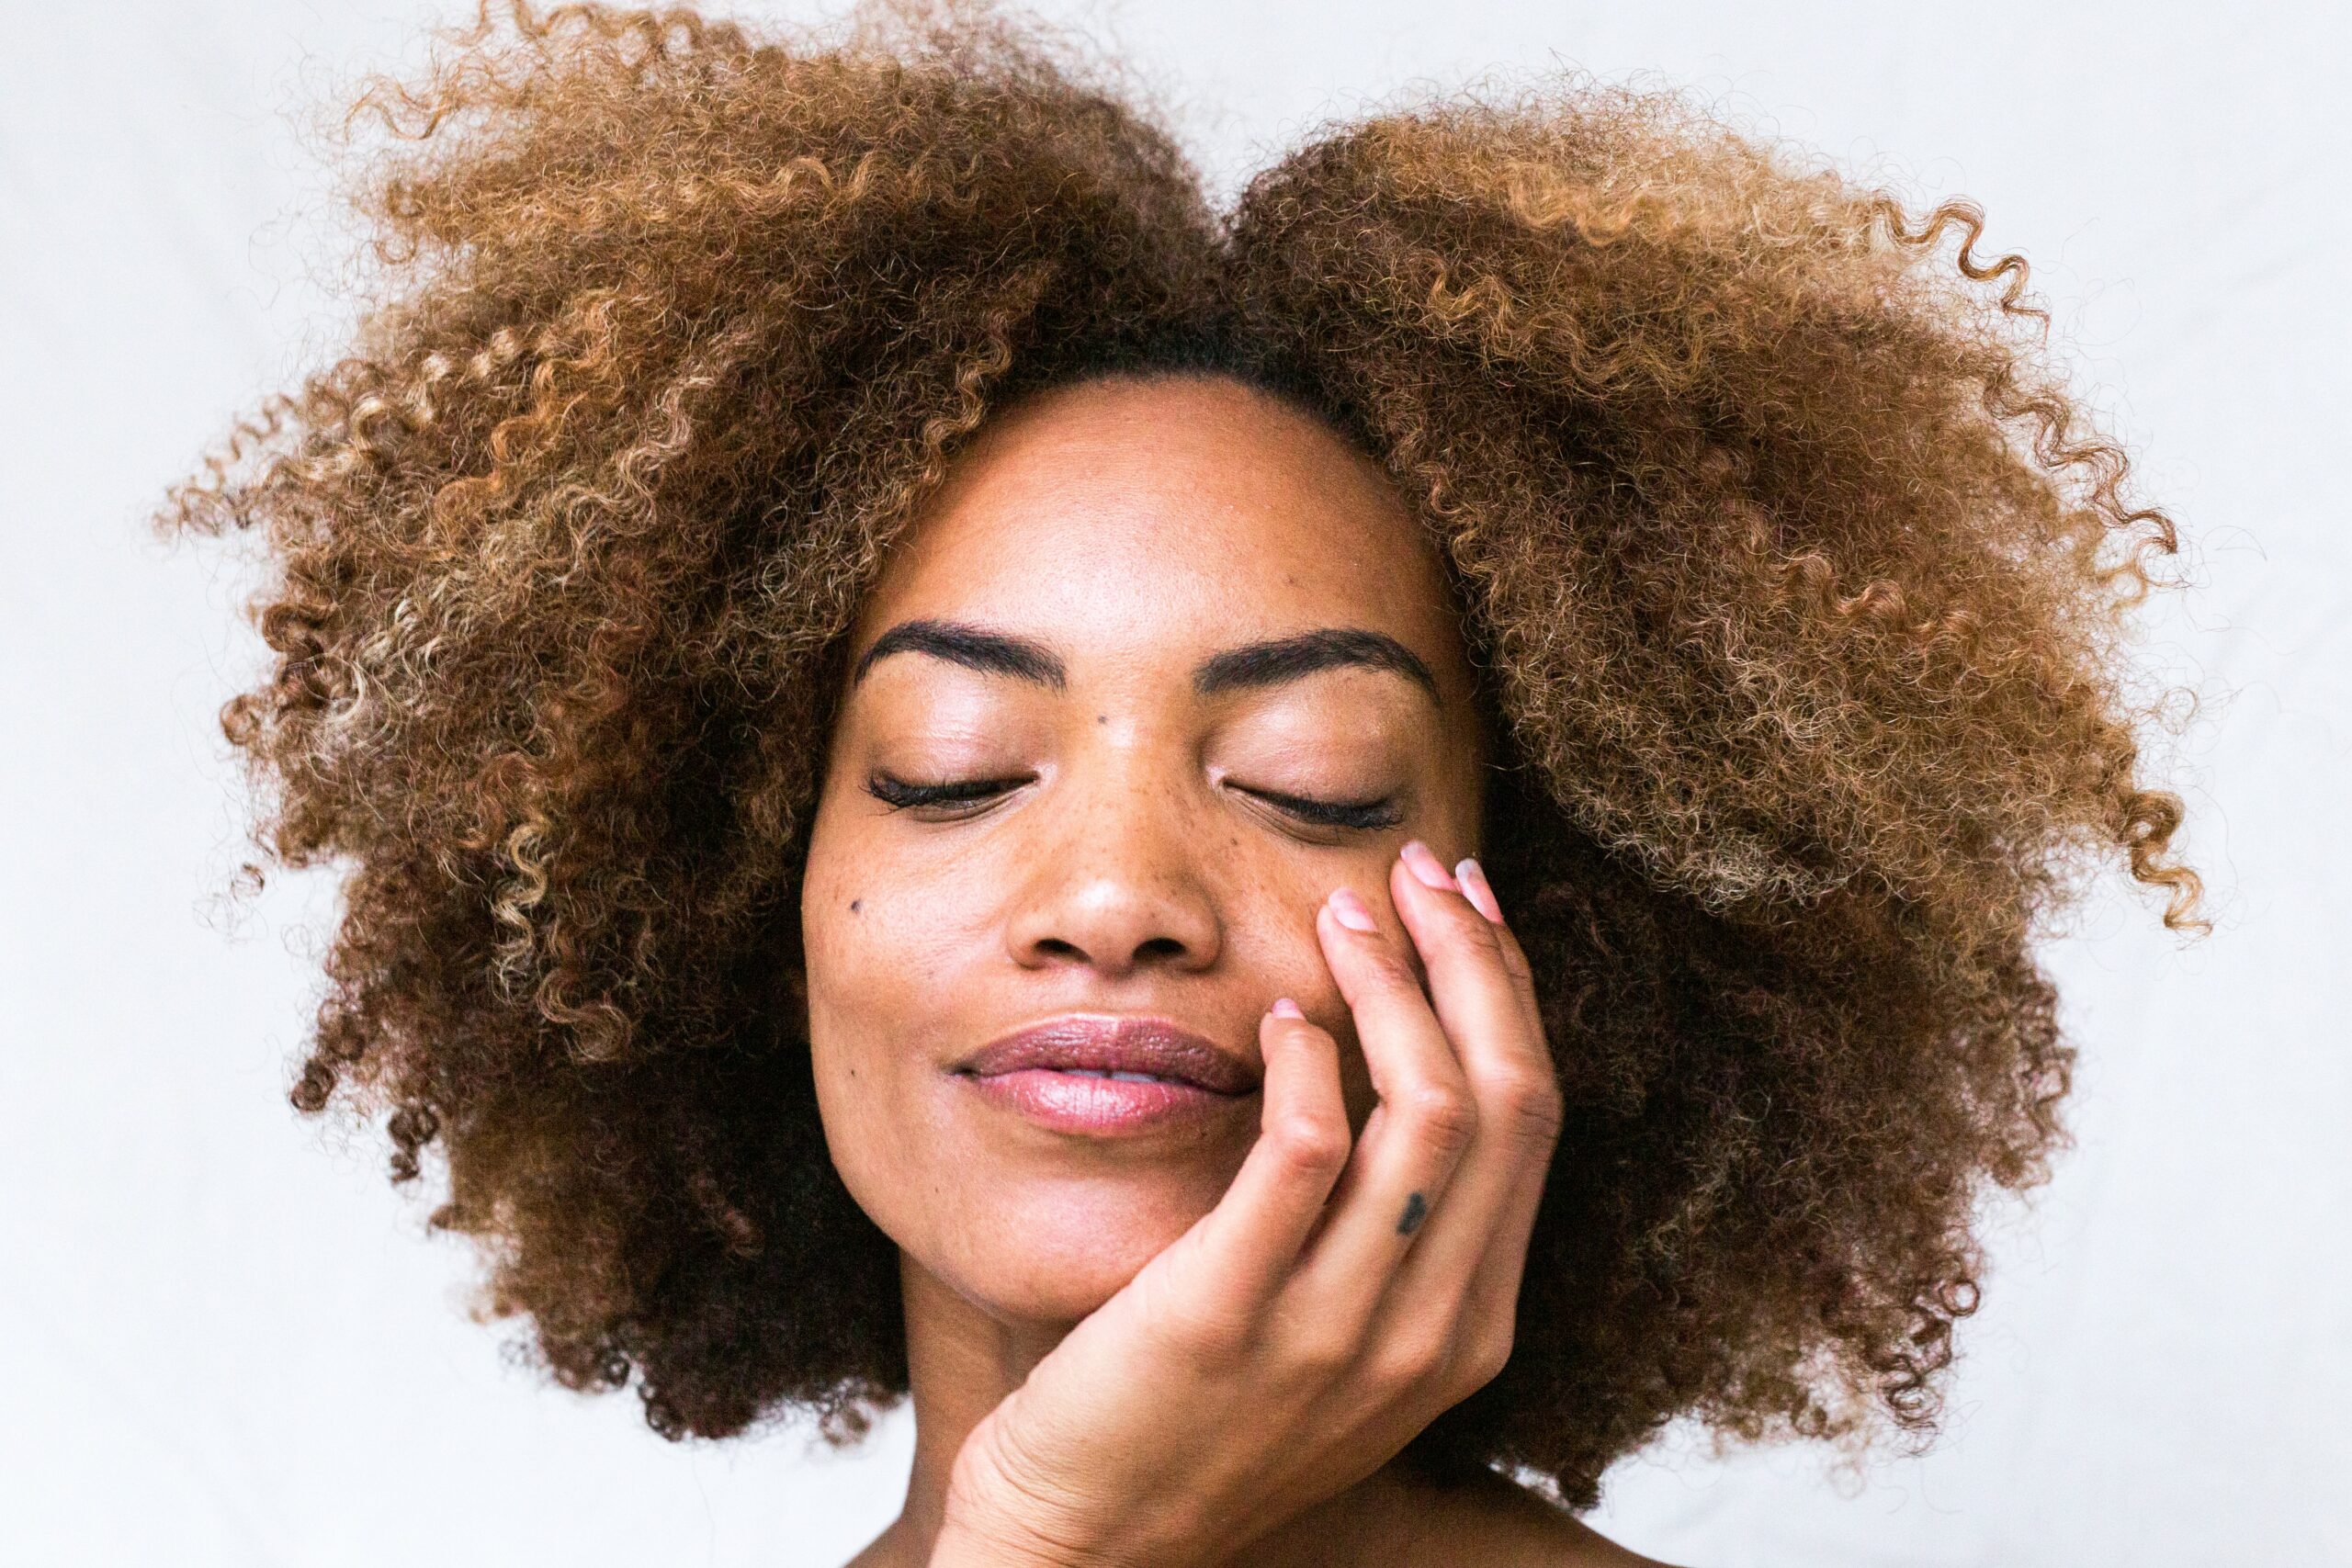 How to Make Your Skincare Routine More Environmentally Friendly